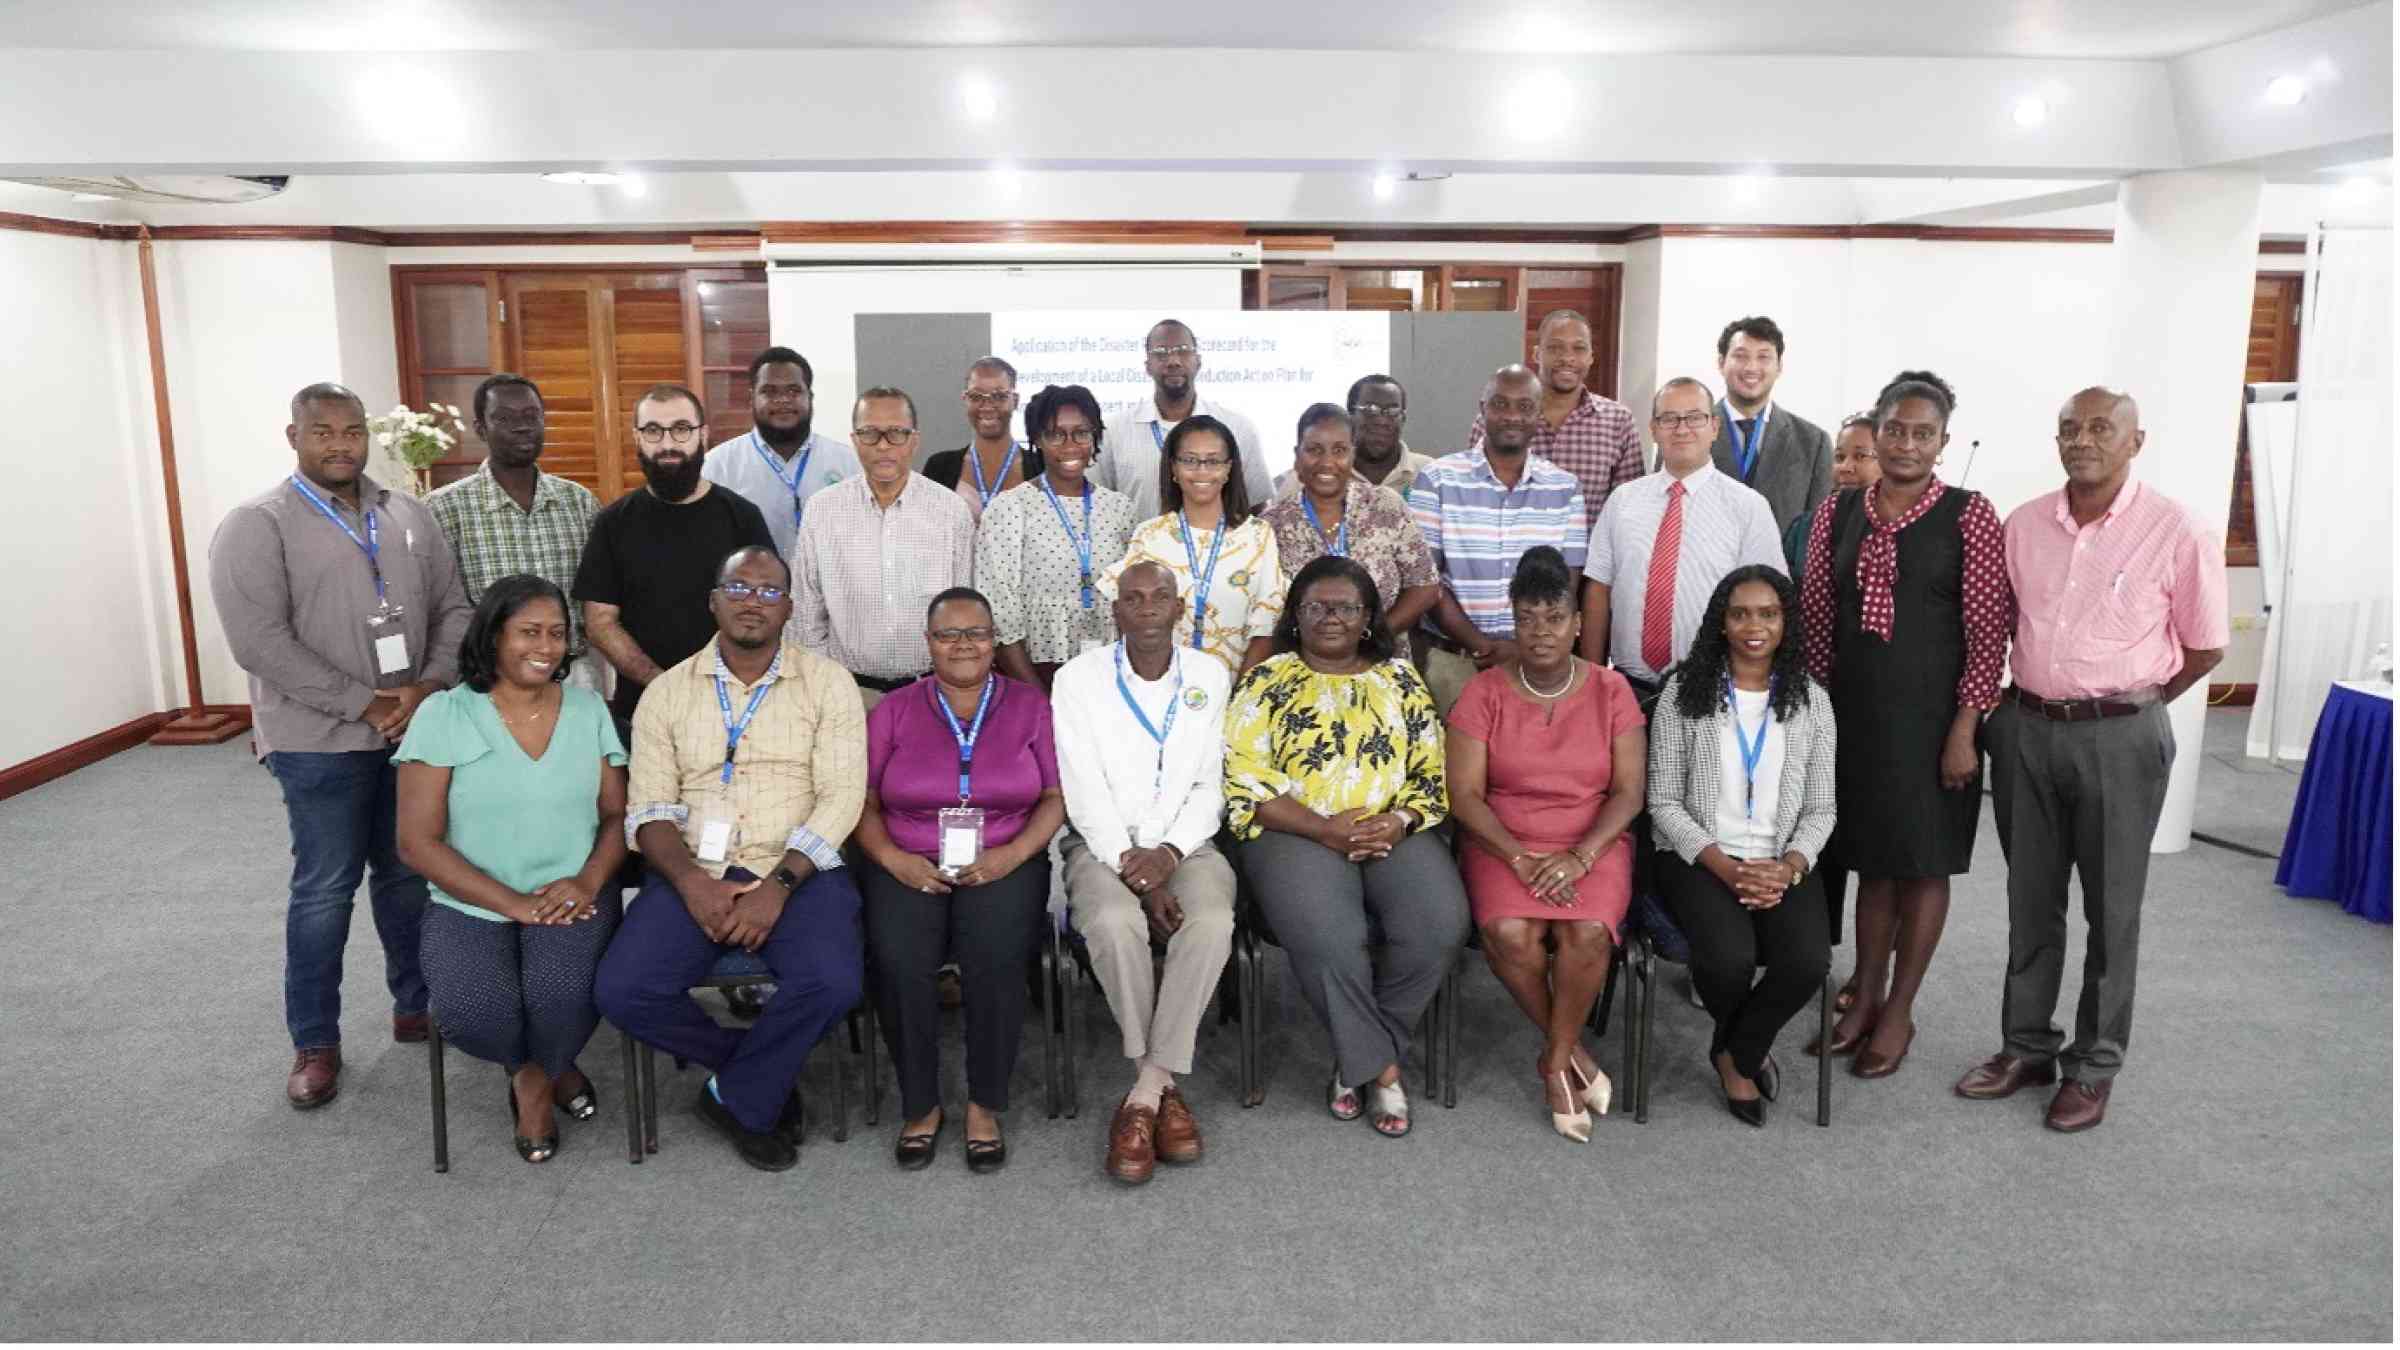 MCR2030 in St. Vincent and the Grenadines